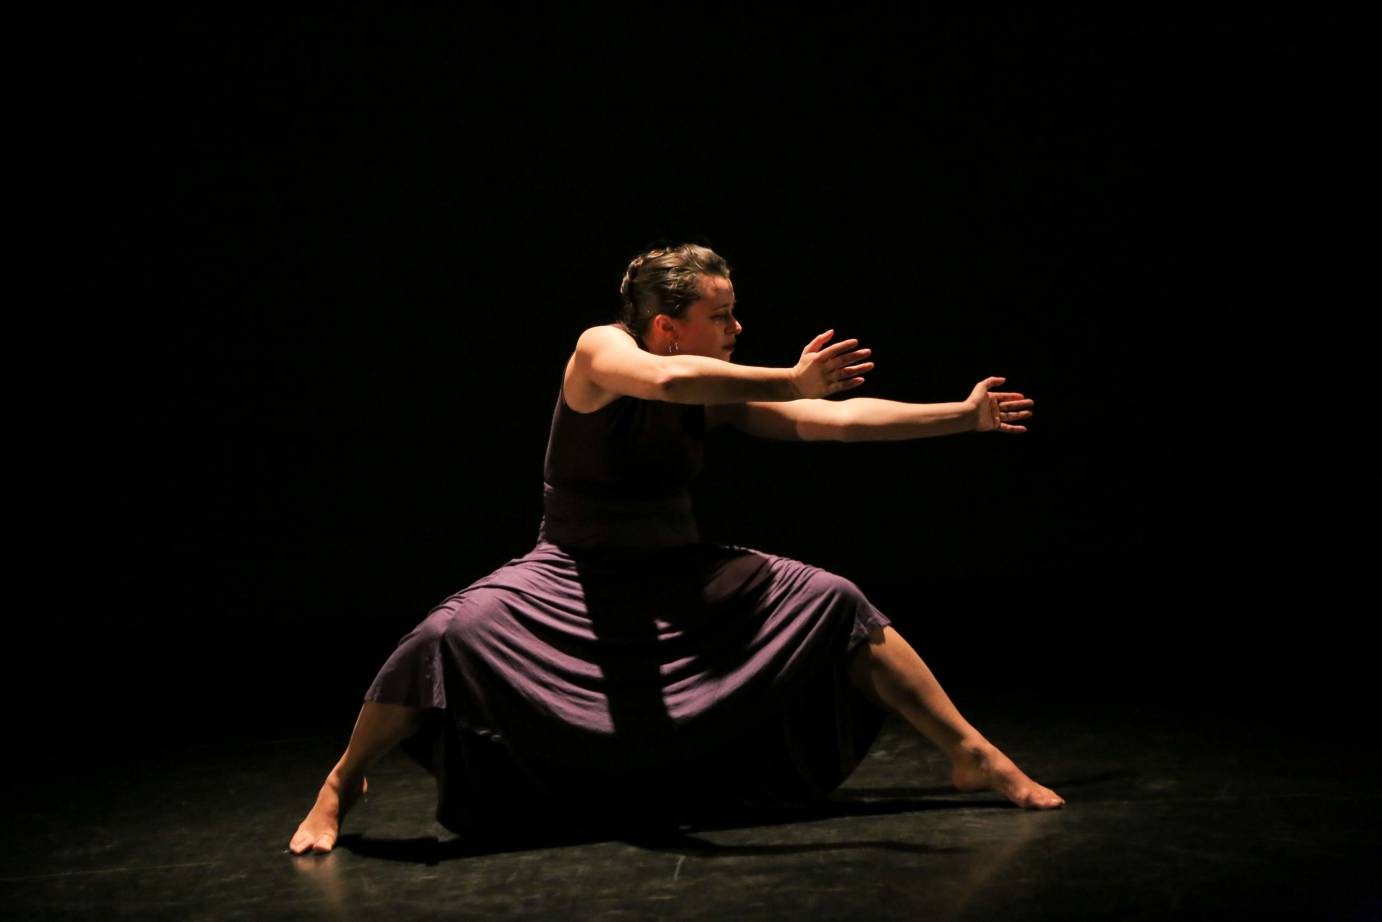 A woman, her legs in a deep squat, stretches her arms to her left side